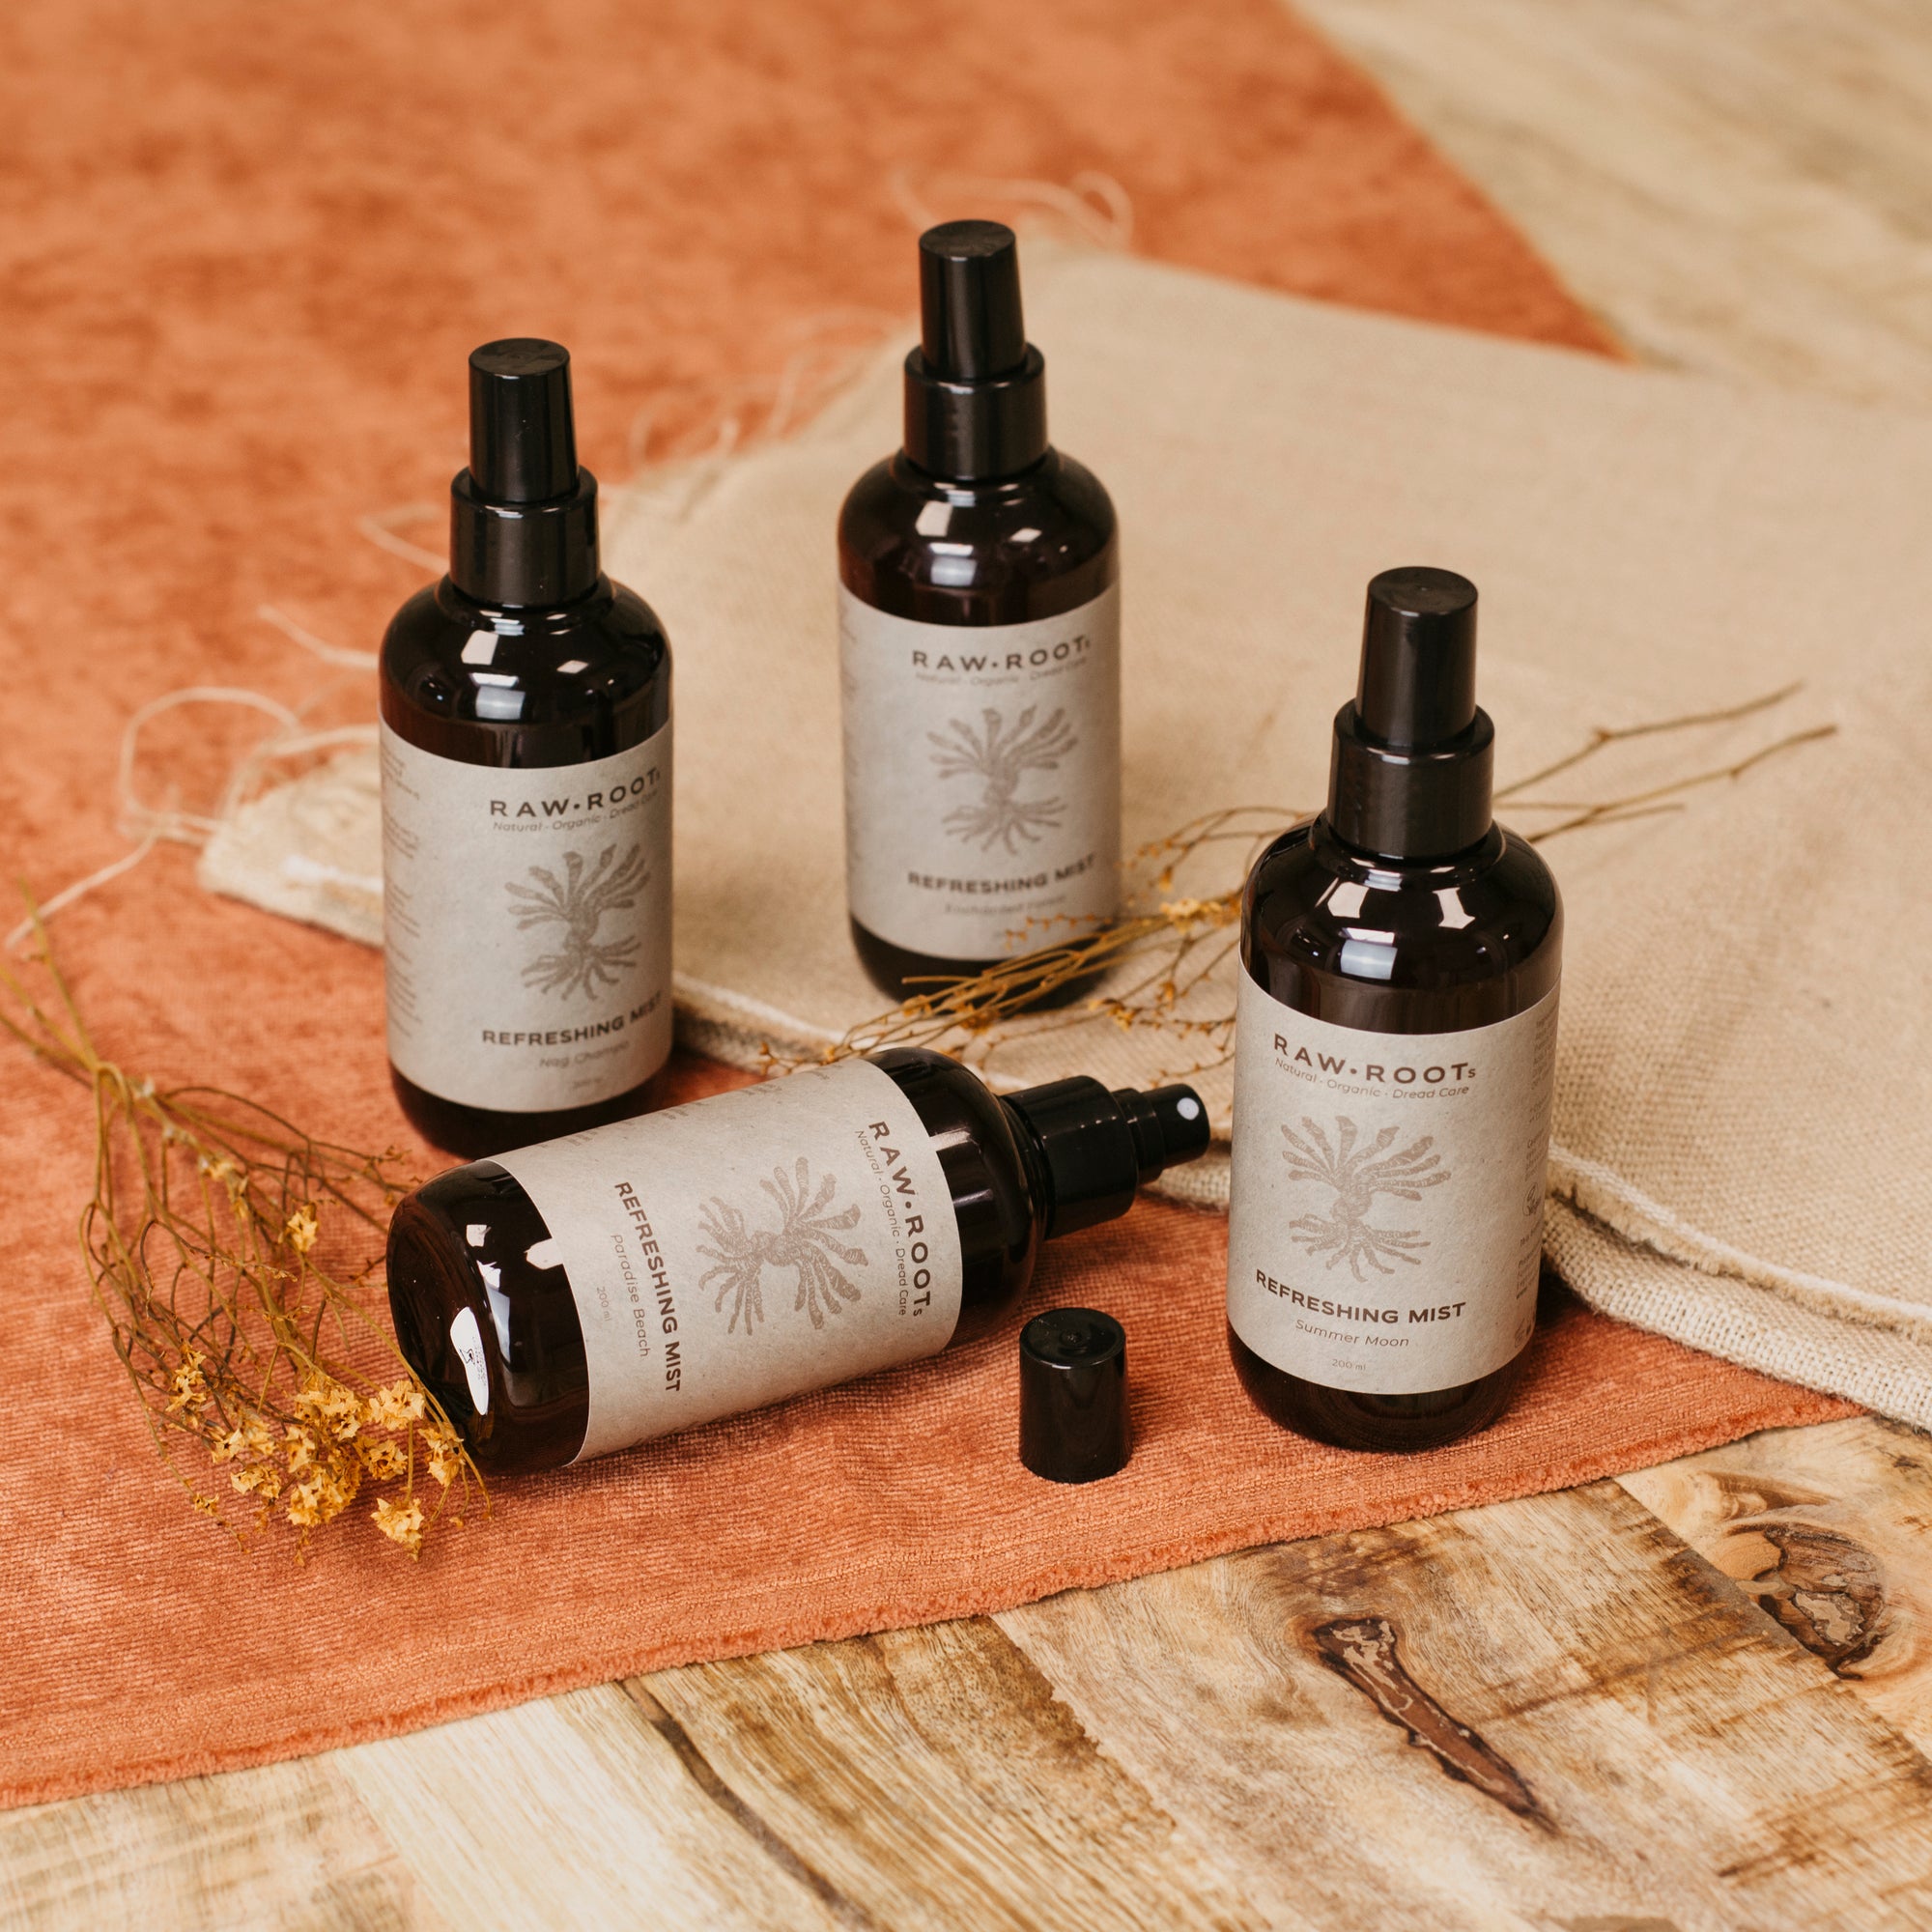 What is the difference between the Rescue Tonic and the Refreshing Mist from RAW ROOTs?